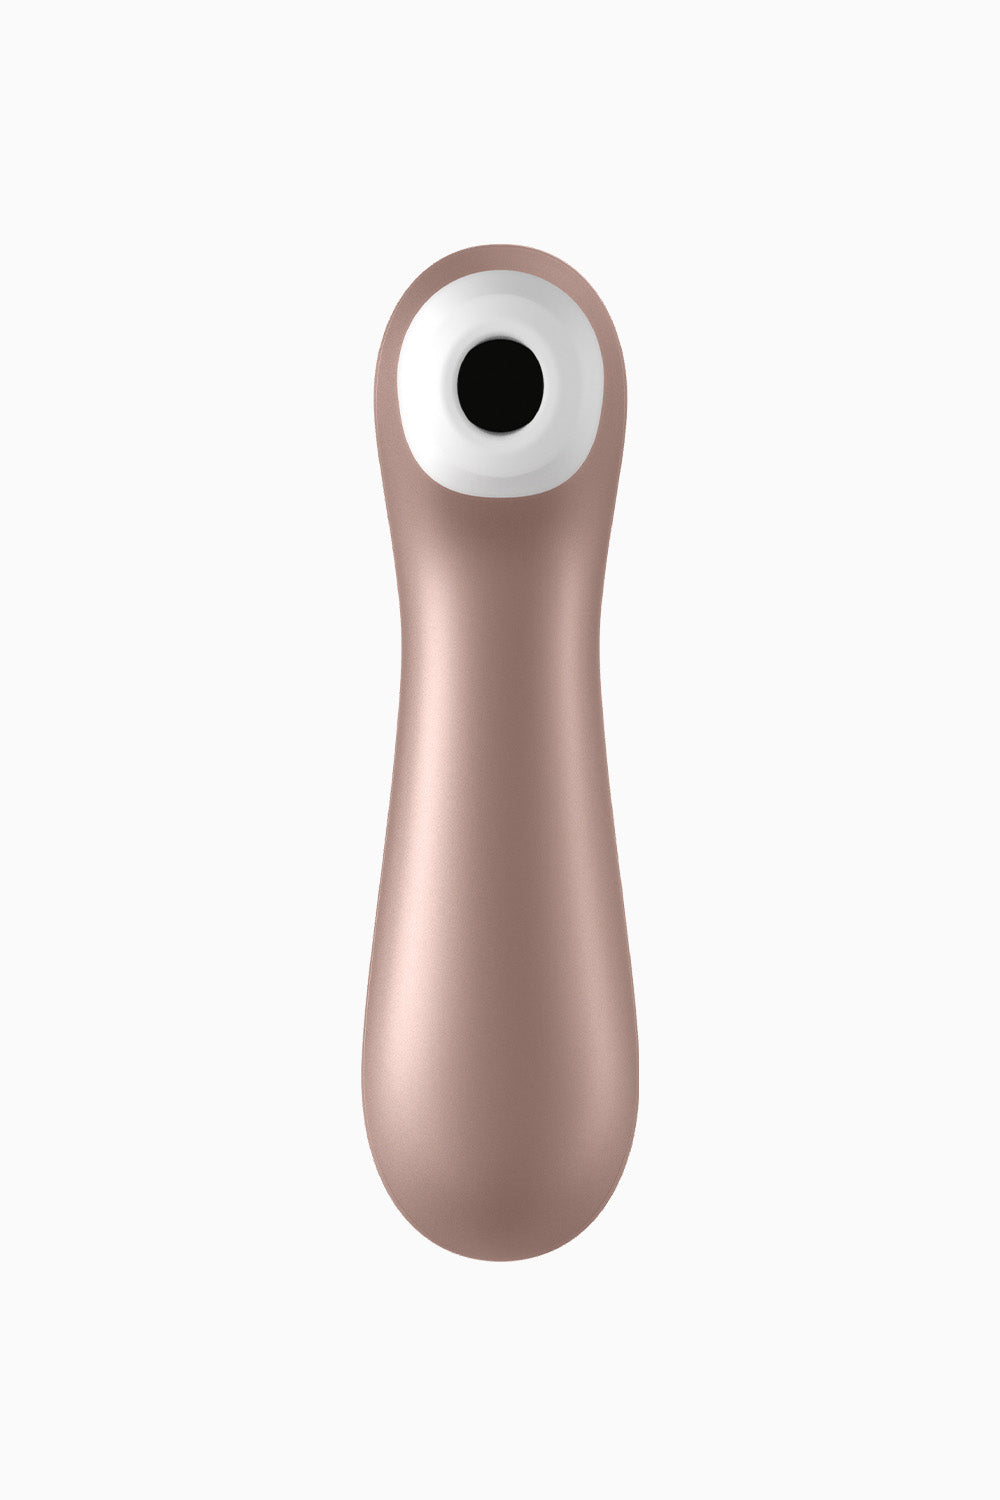 Satisfyer Vibration Pro 2+ Air Simulator, 5.5 Inches